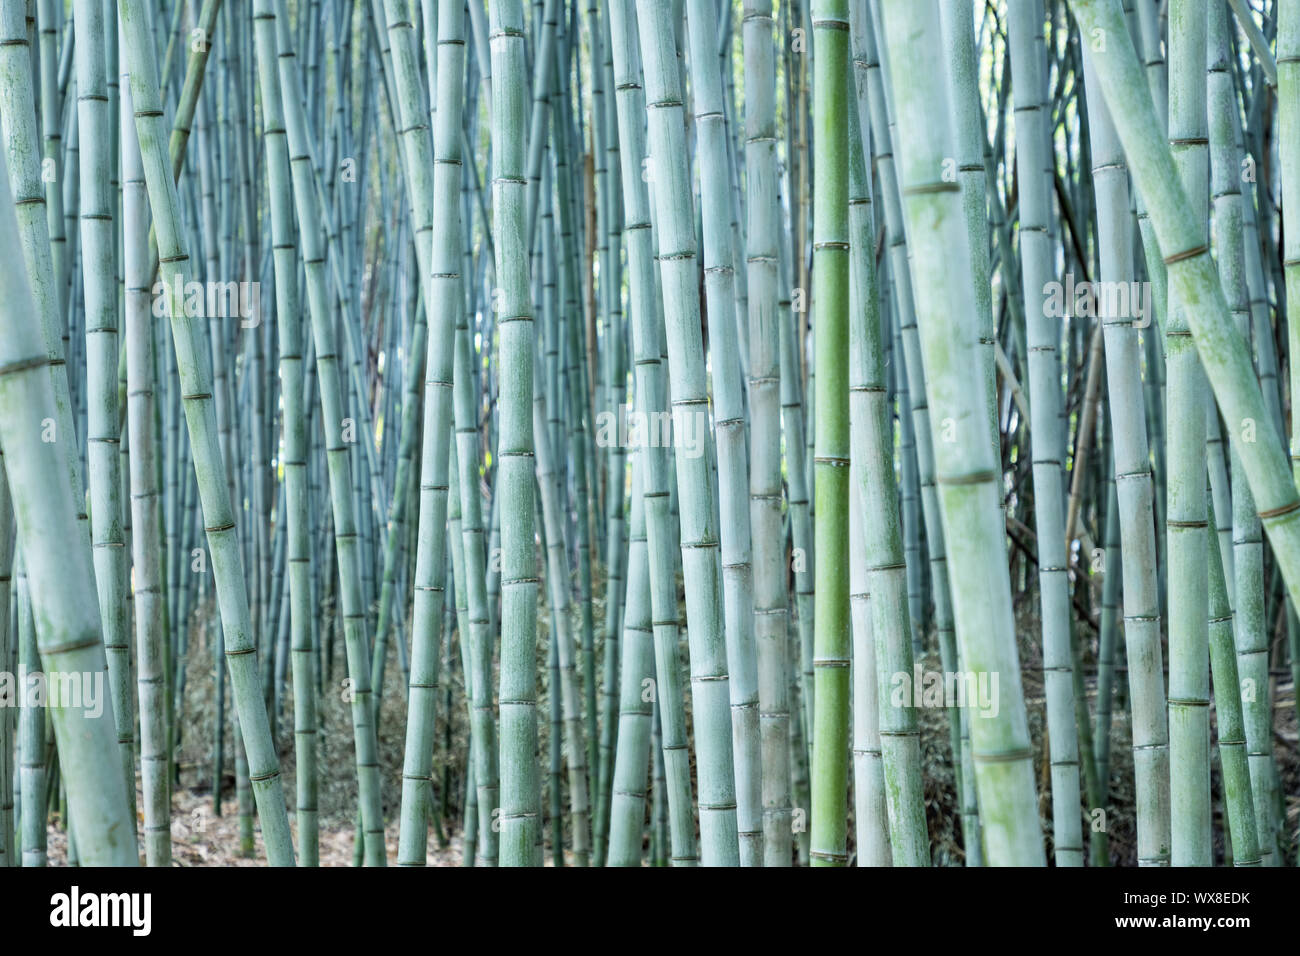 dense bamboo forest Stock Photo